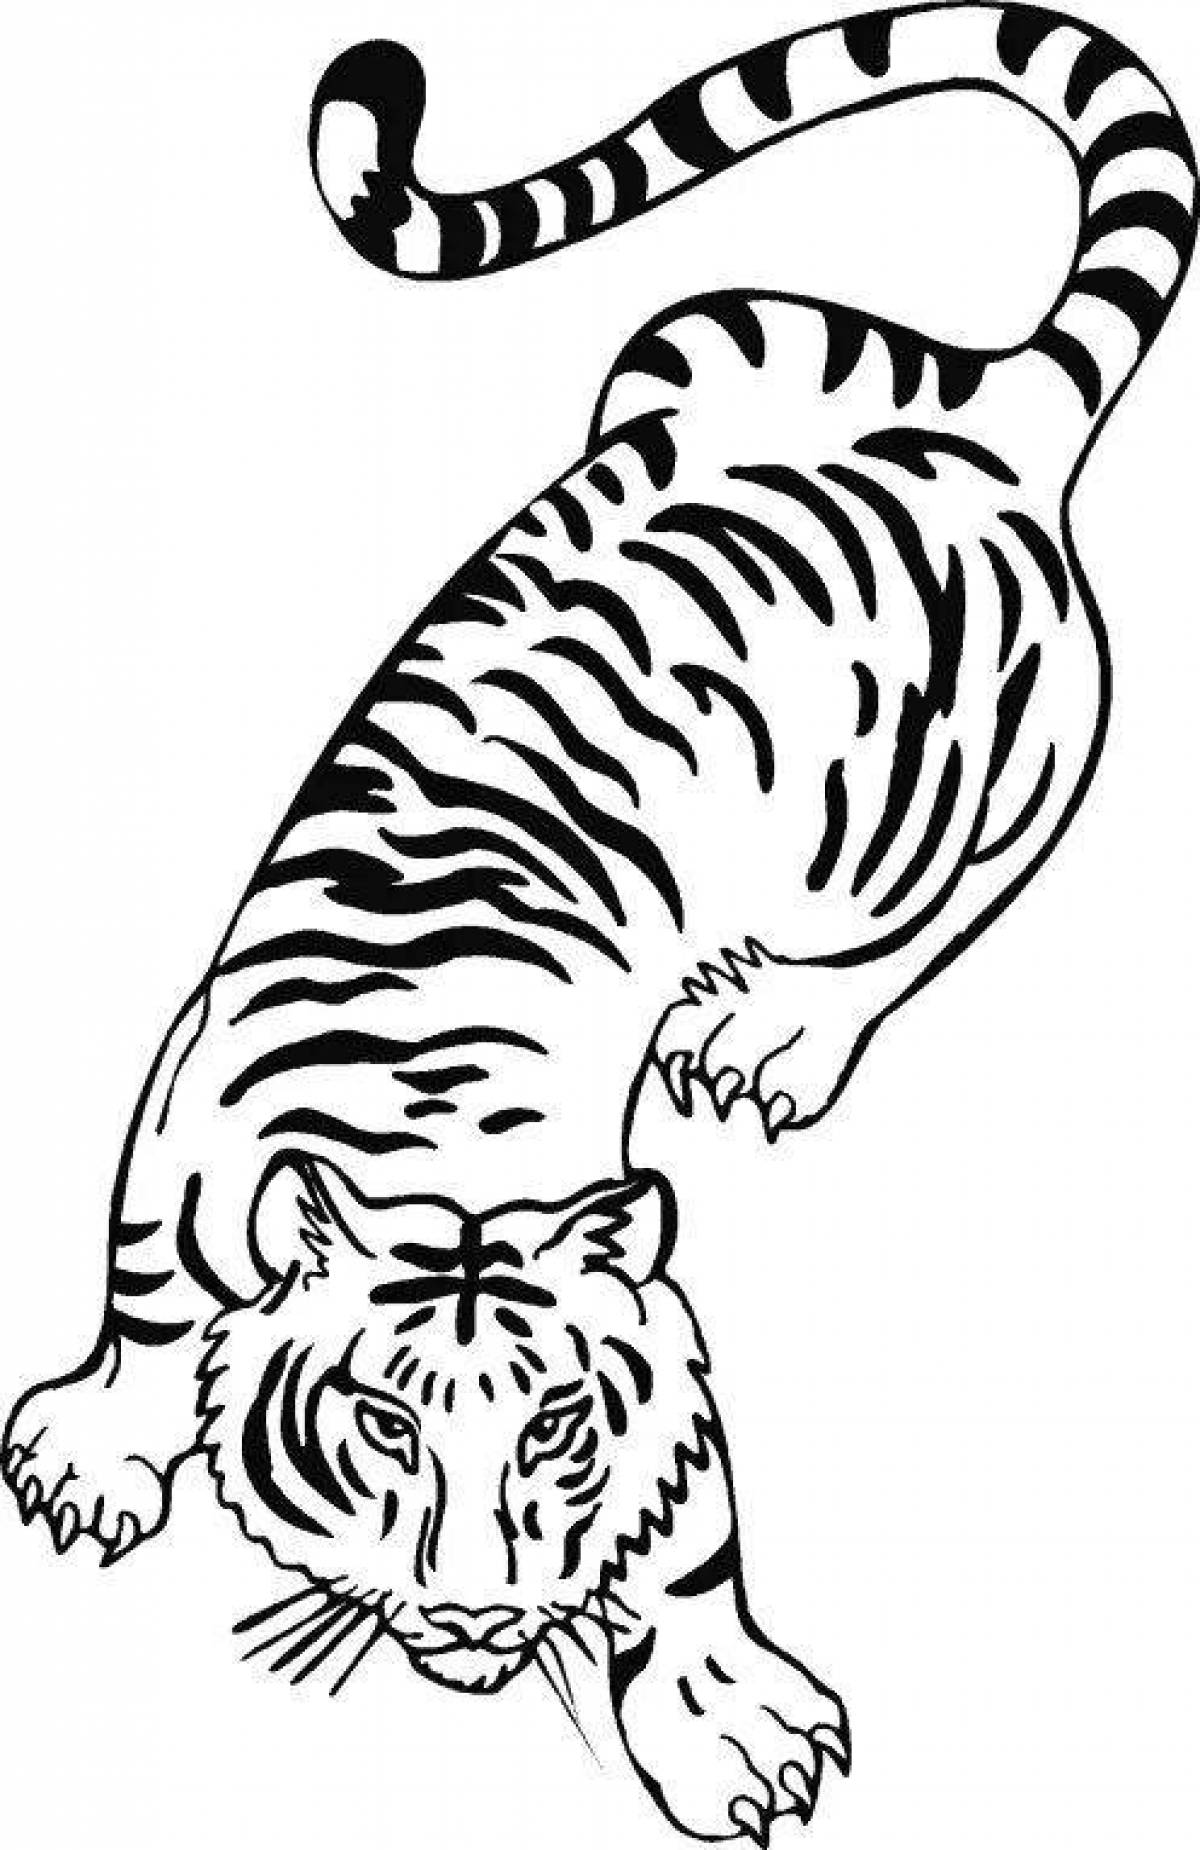 Colourful bengal tiger coloring page